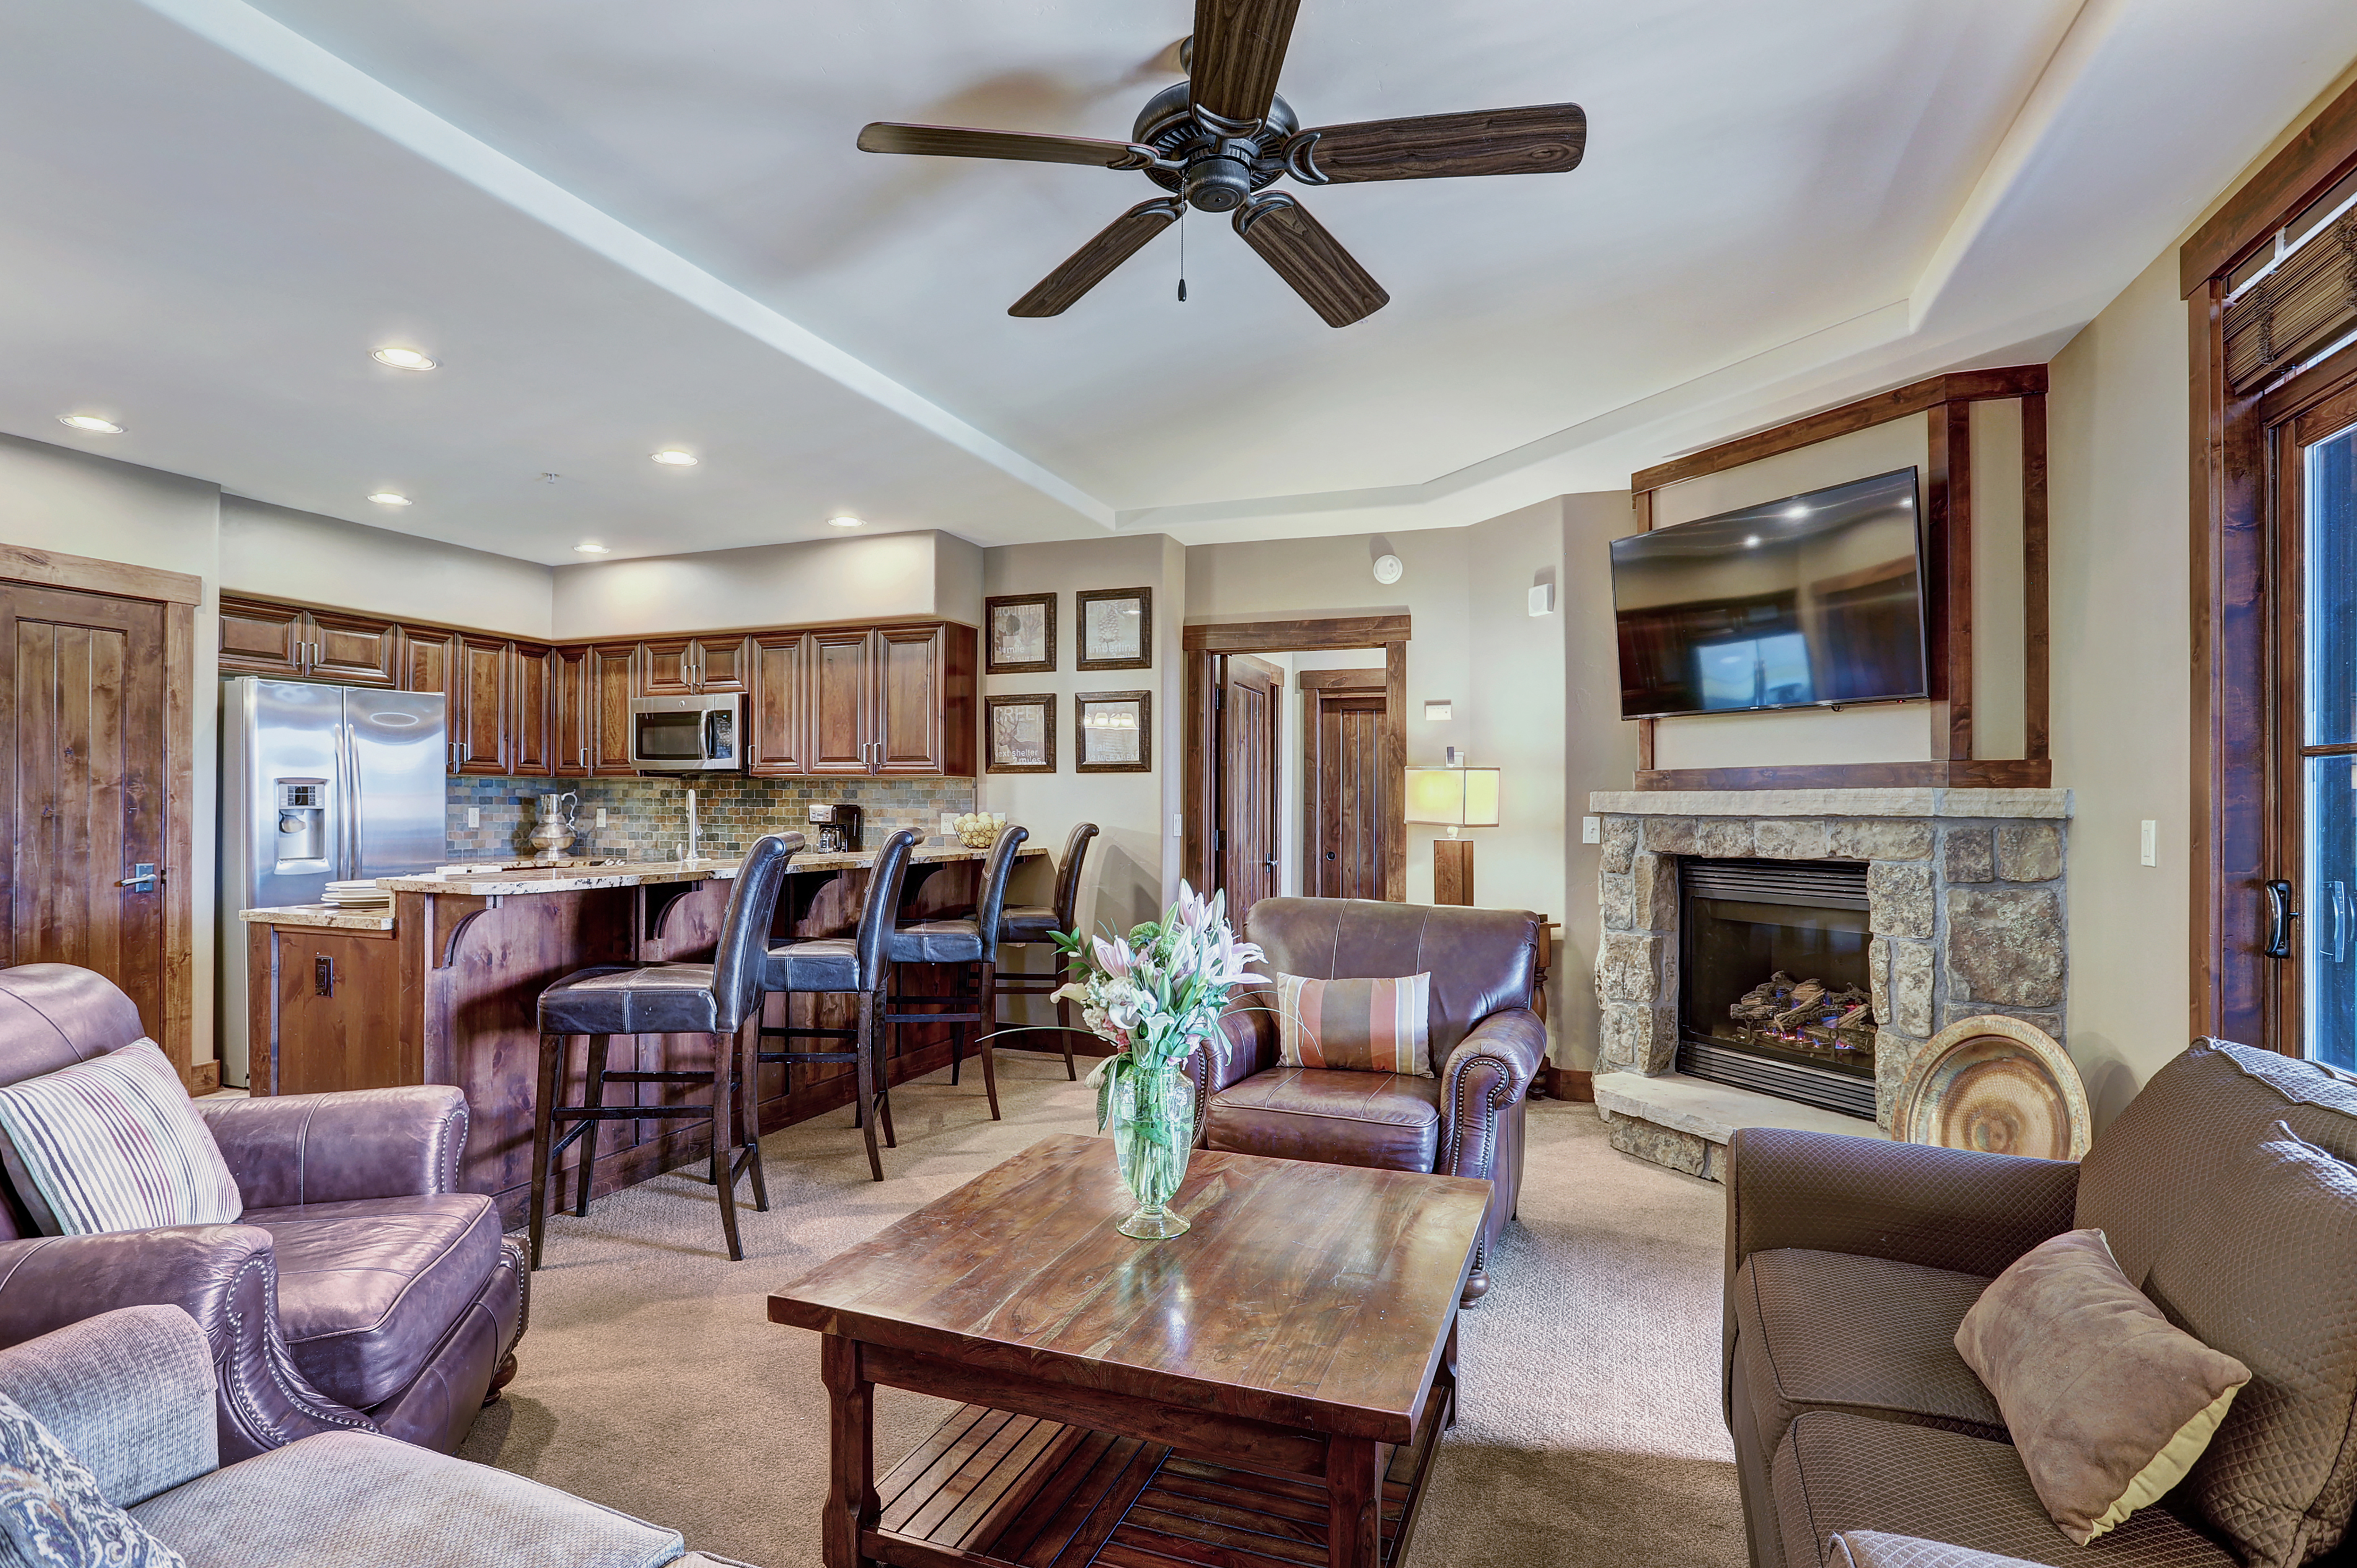 Enjoy family time in this open concept kitchen and living area.